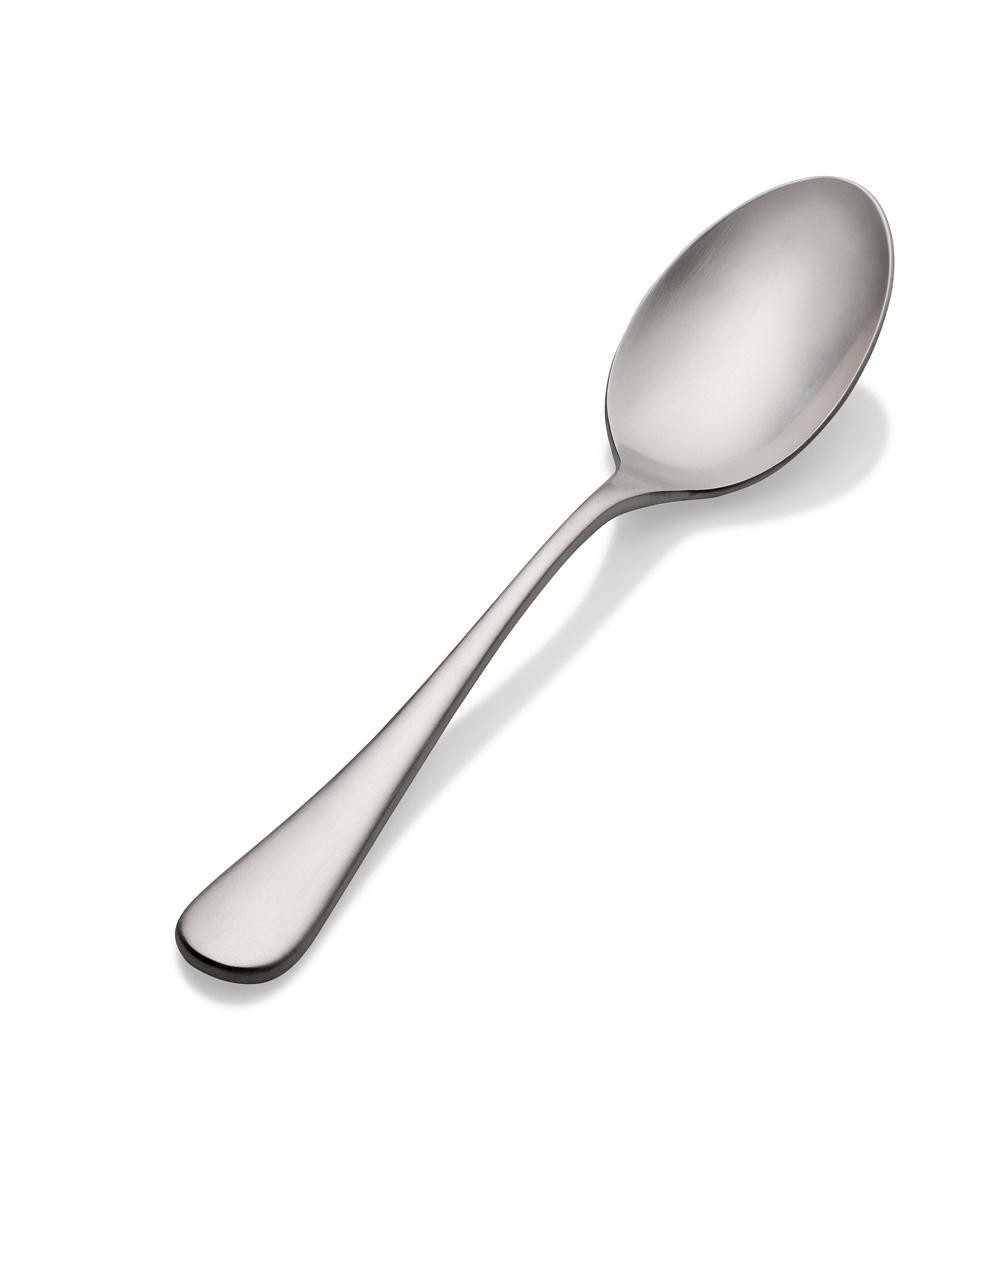 Bon Chef S4104S Como Satin Finish 18/8 Stainless Steel  Serving Spoon